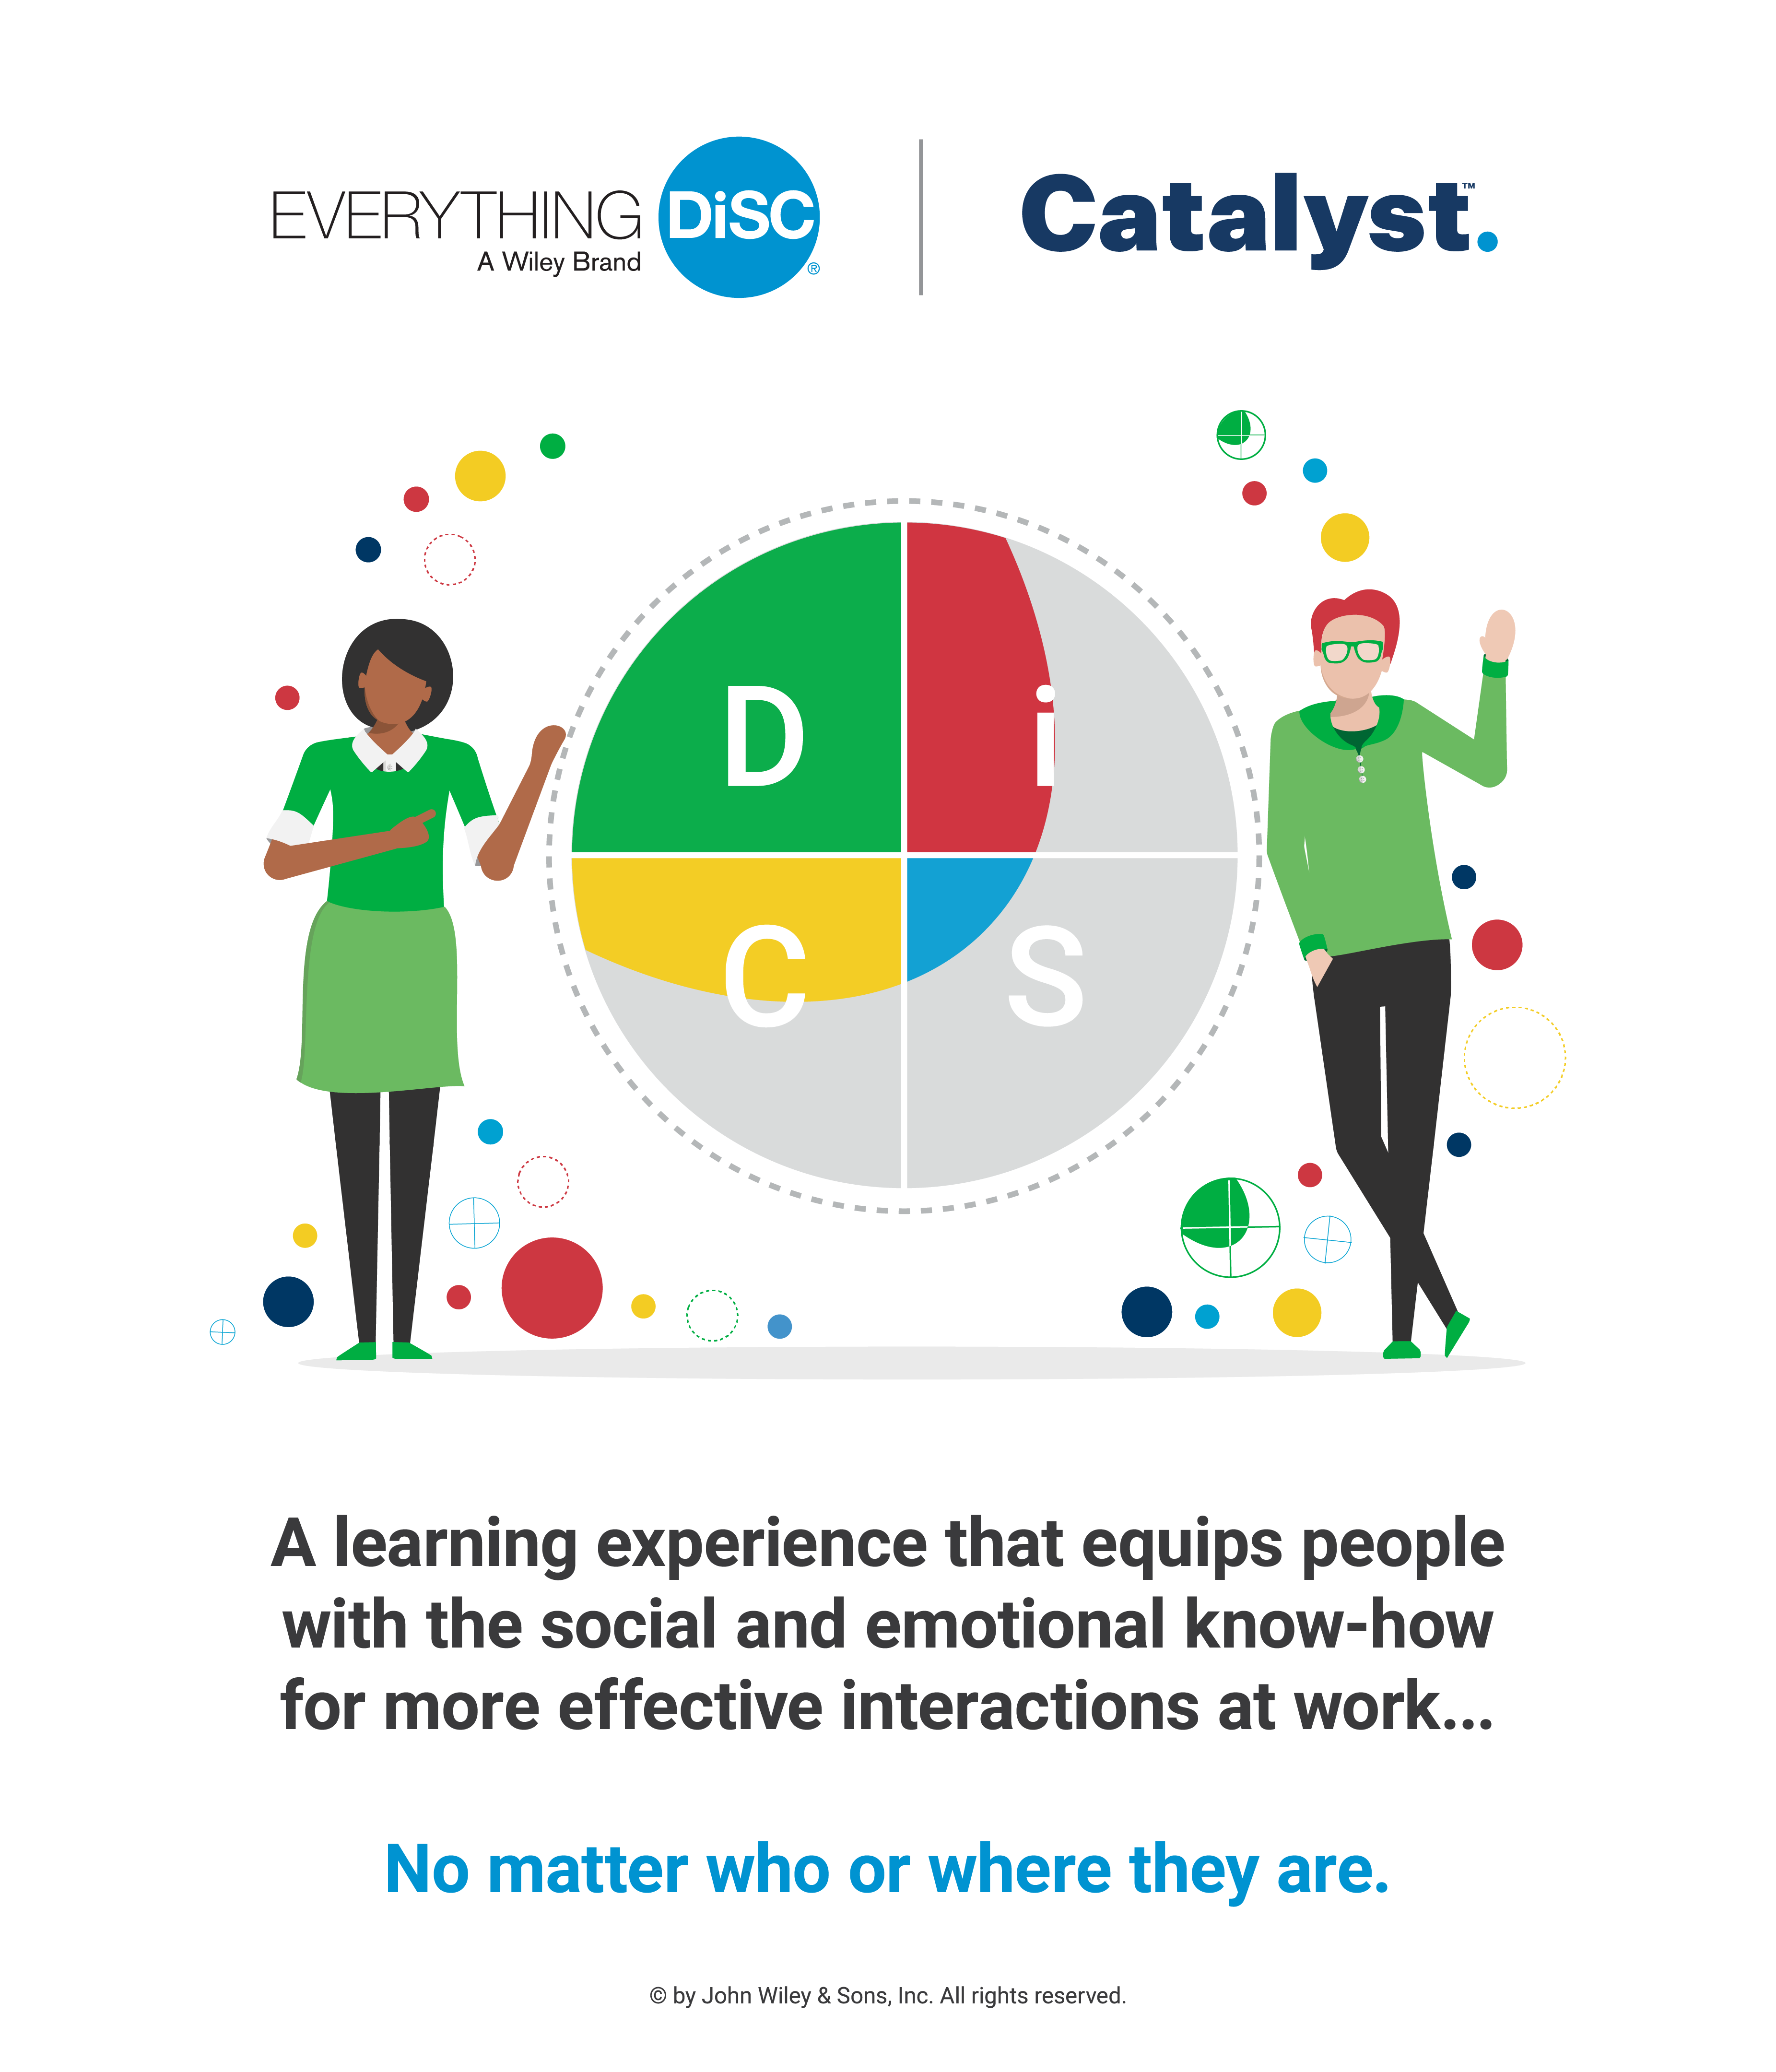 everything-disc-on-catalyst-image-1.png